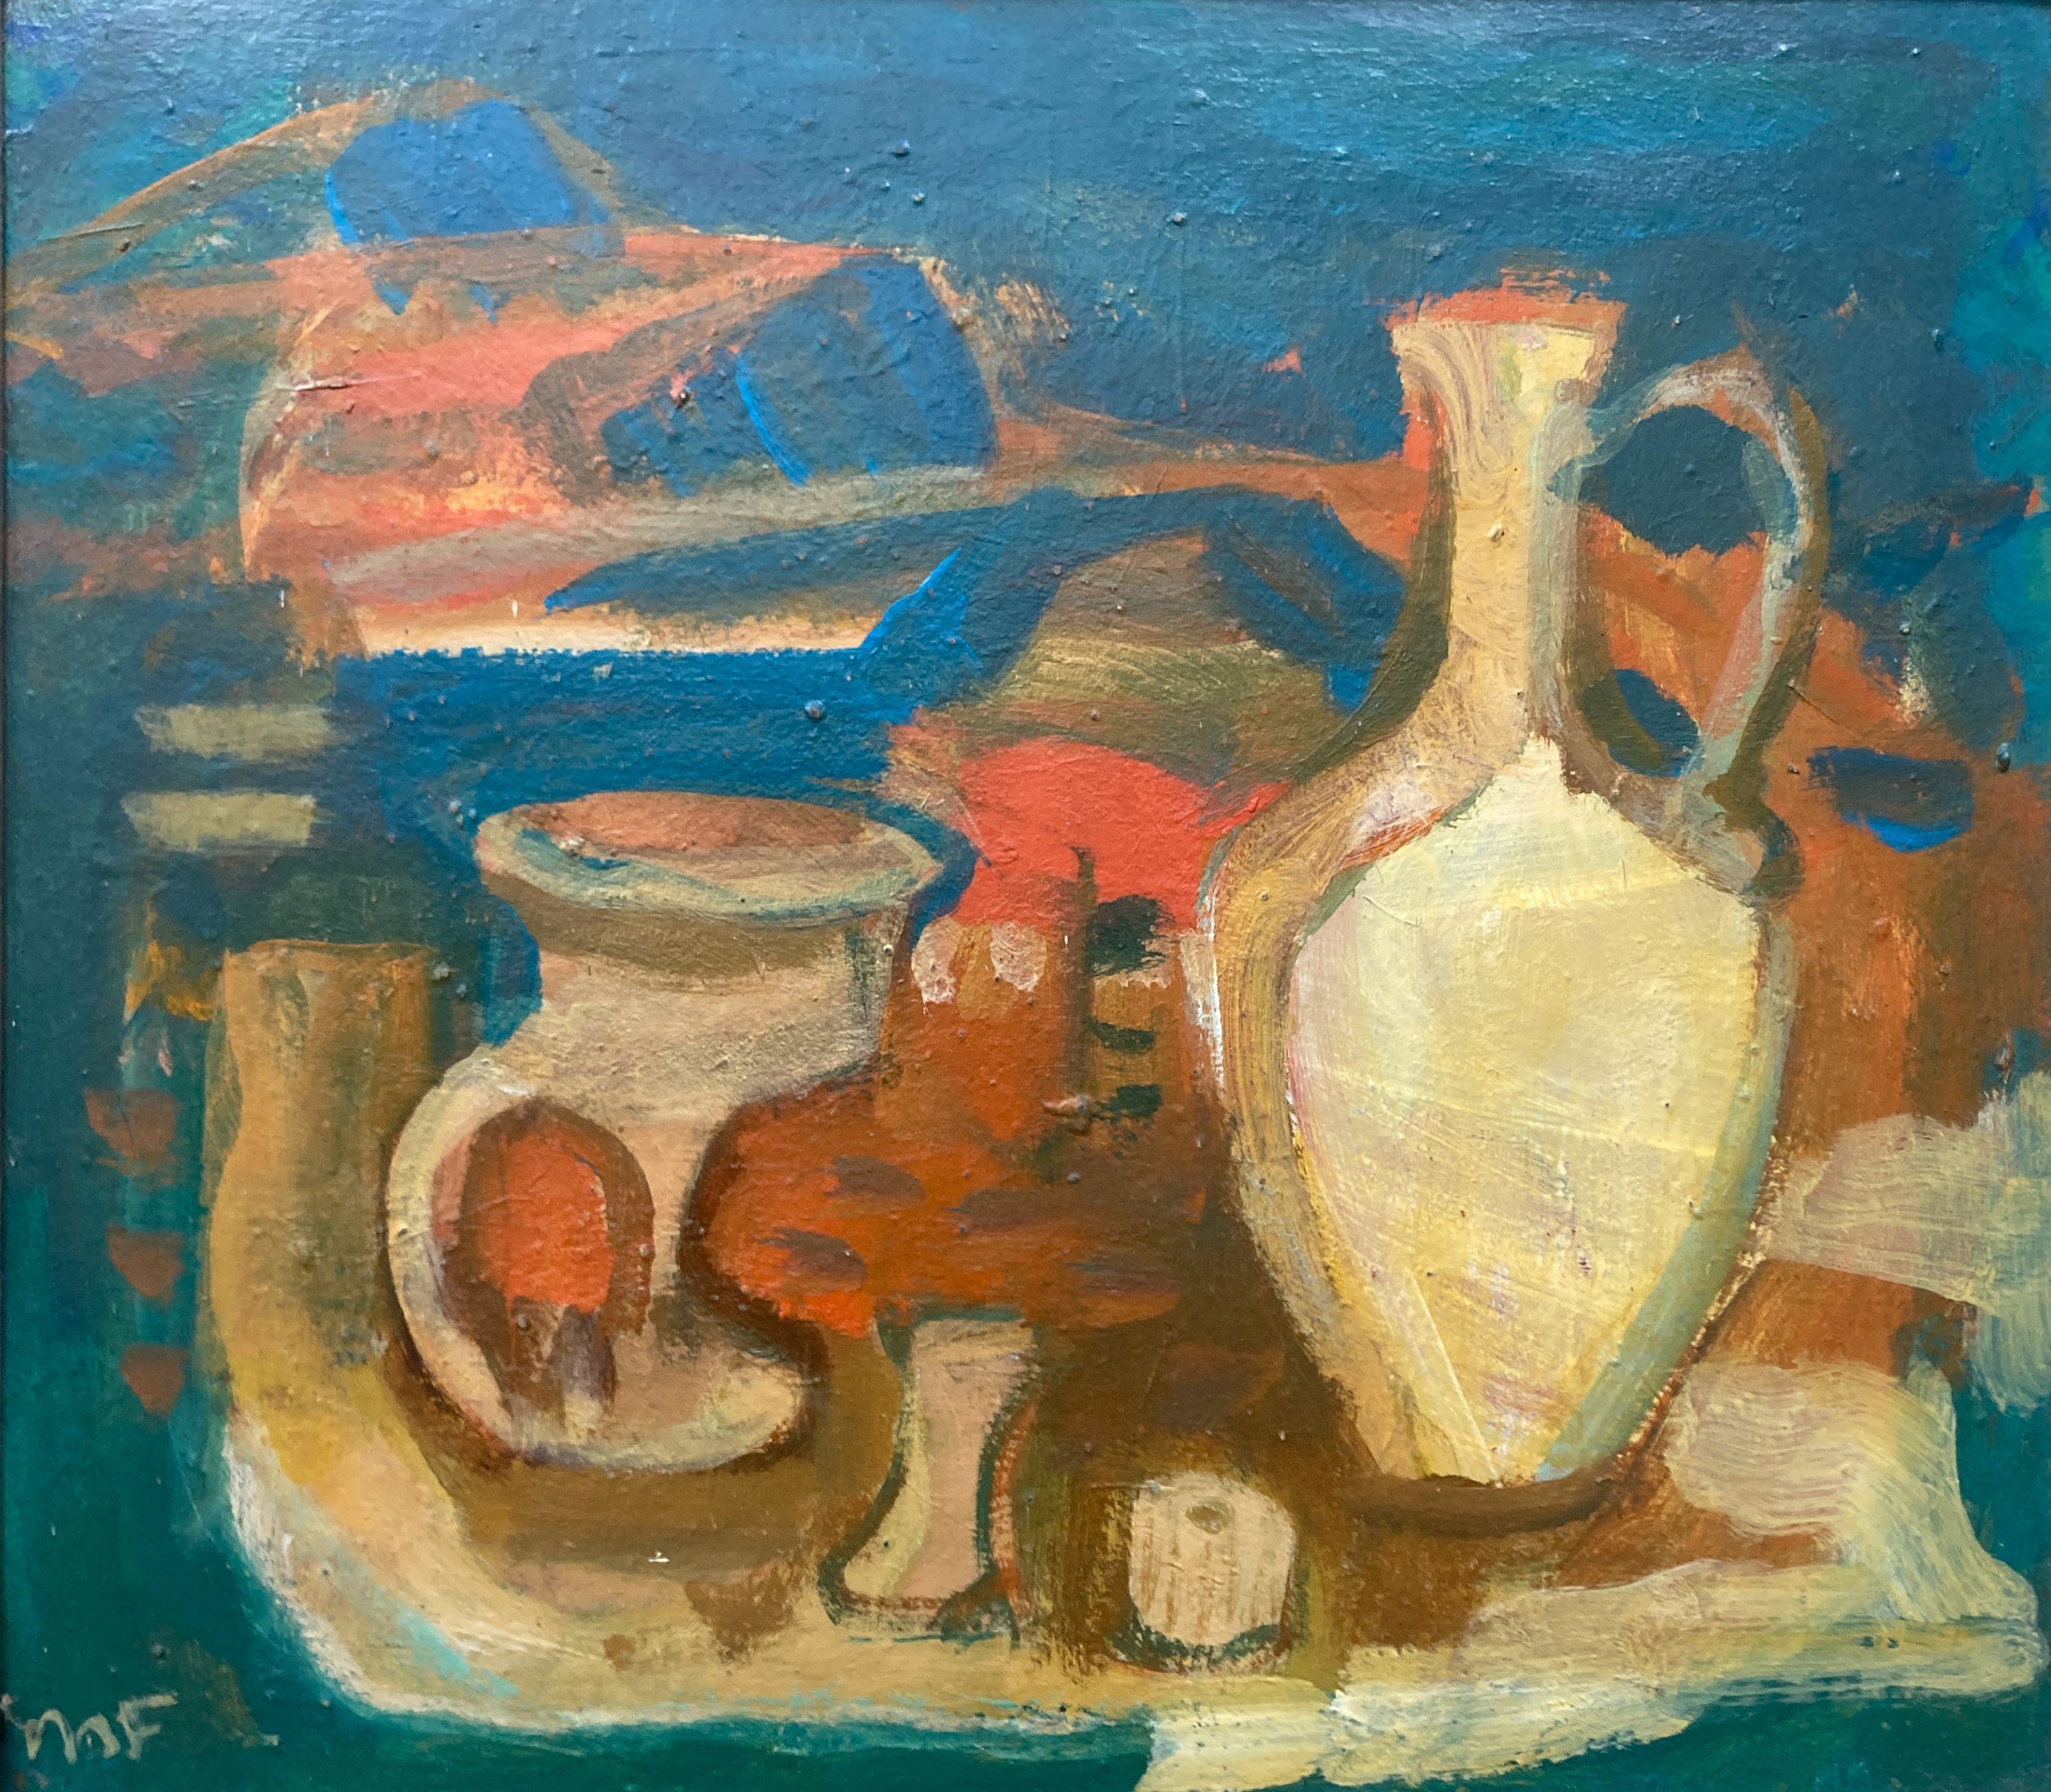 Myrta Fisher (1917-1999), oil on board, still life with jug, signed, 40 x 45cm.